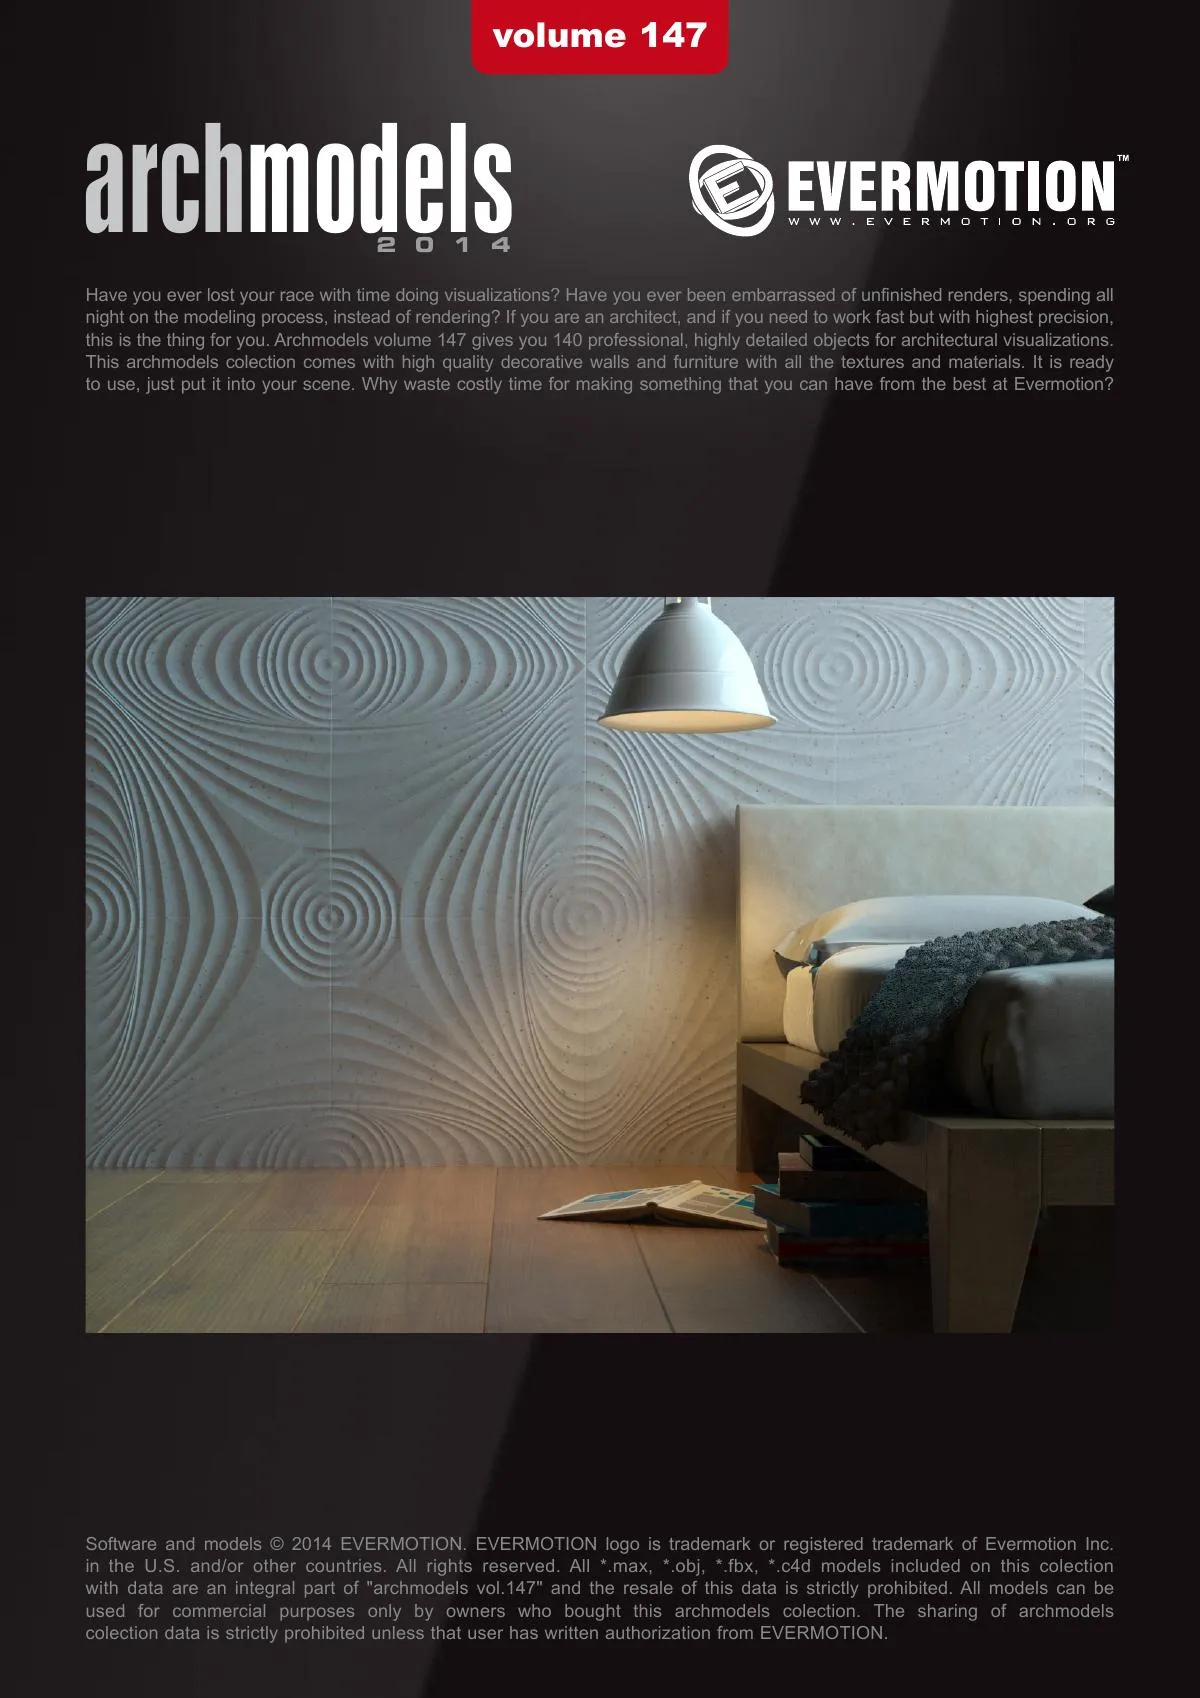 Evermotion Archmodels Vol 147 [decorative wall]